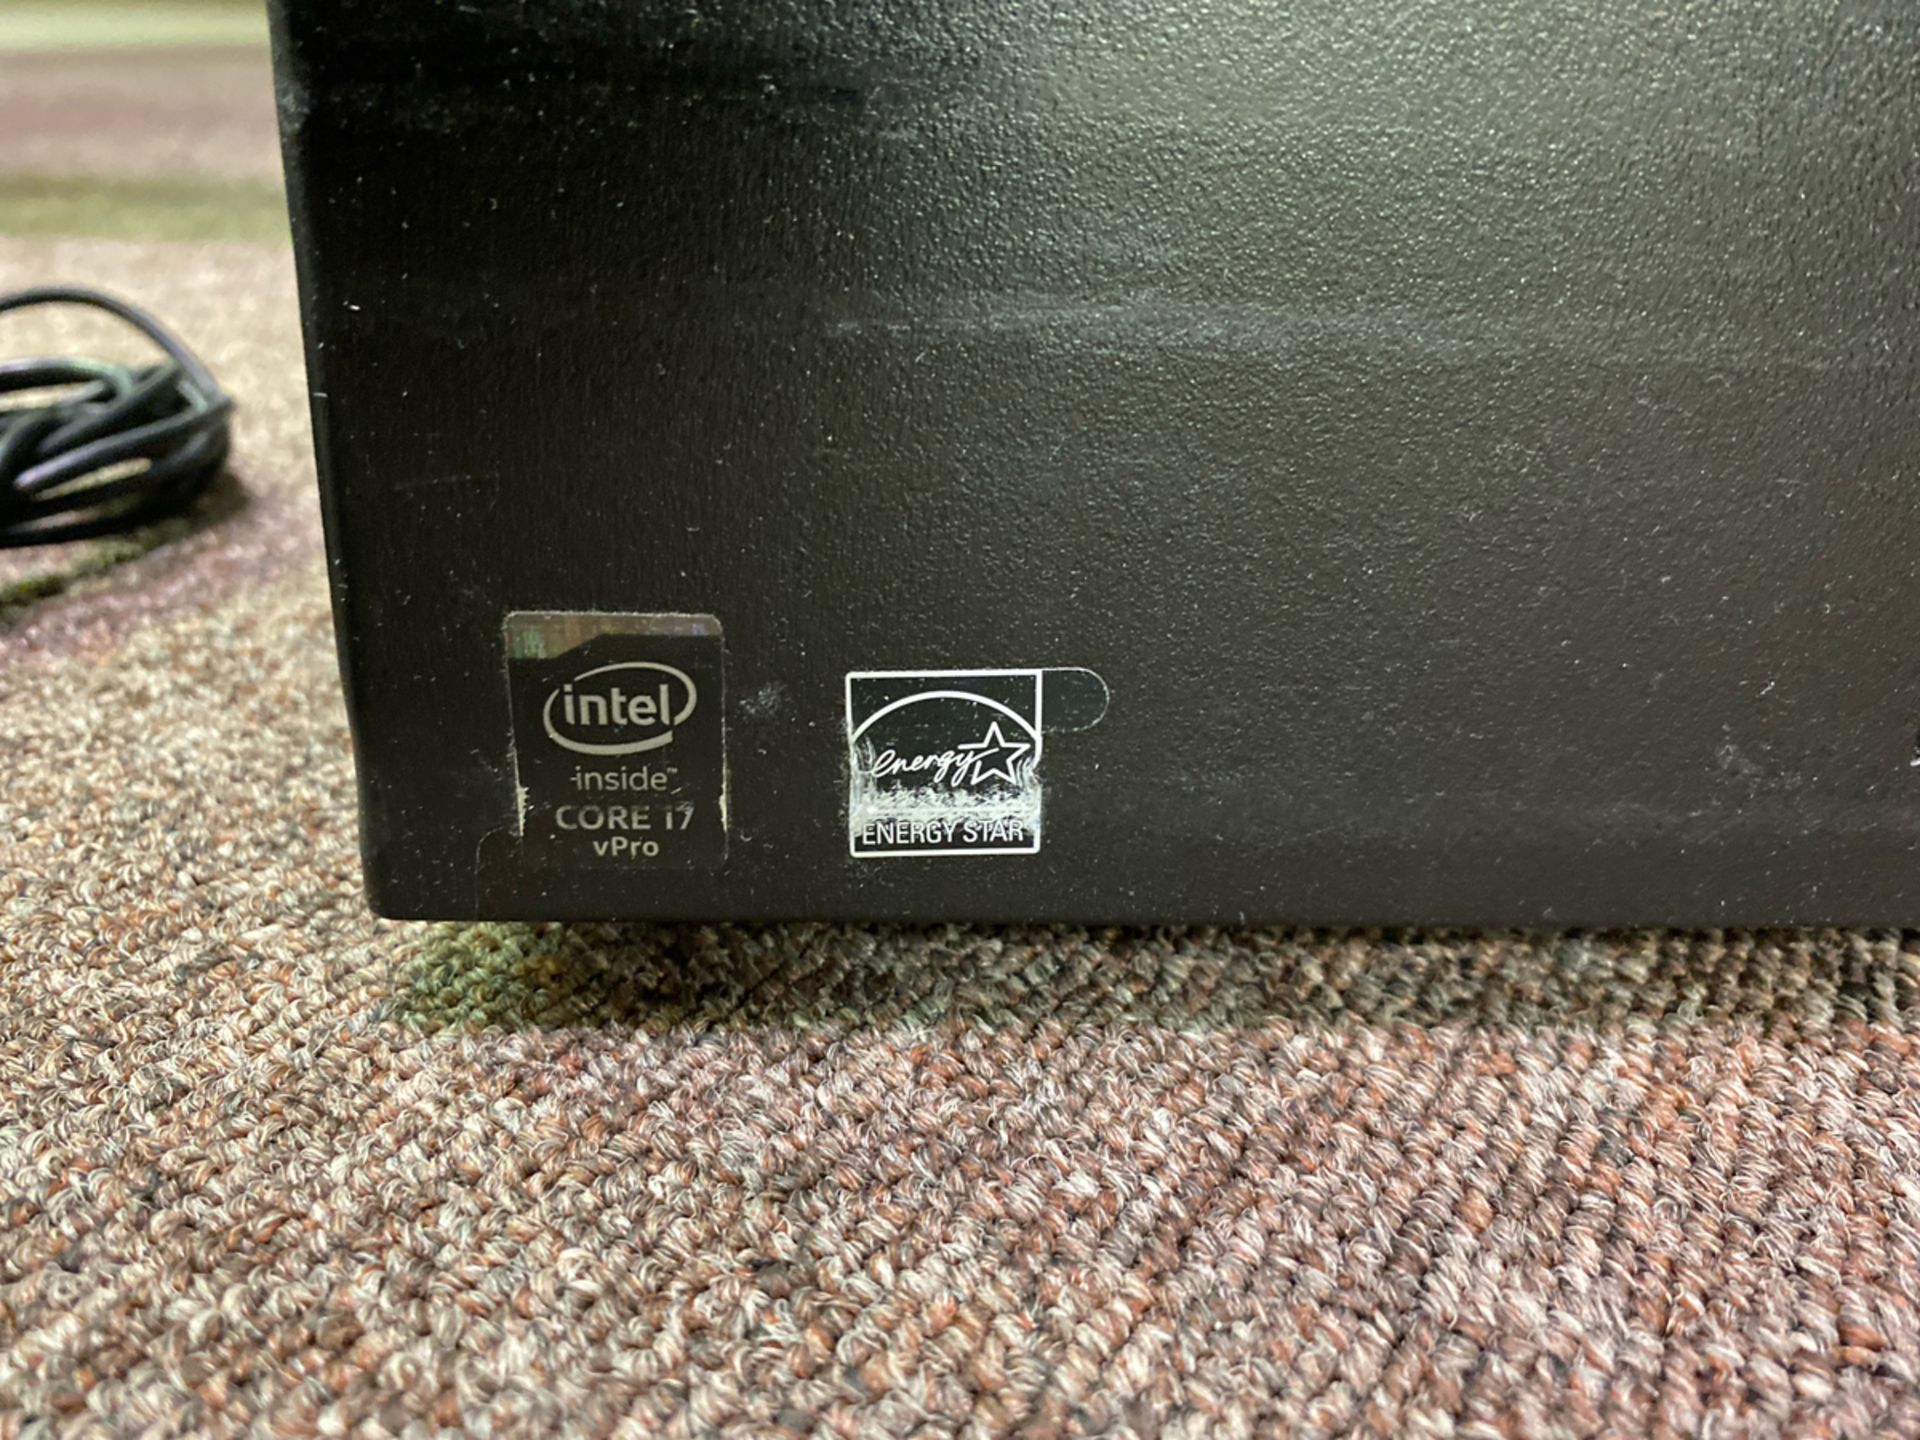 ThinkCentre i7 vPro Computer - Image 3 of 4